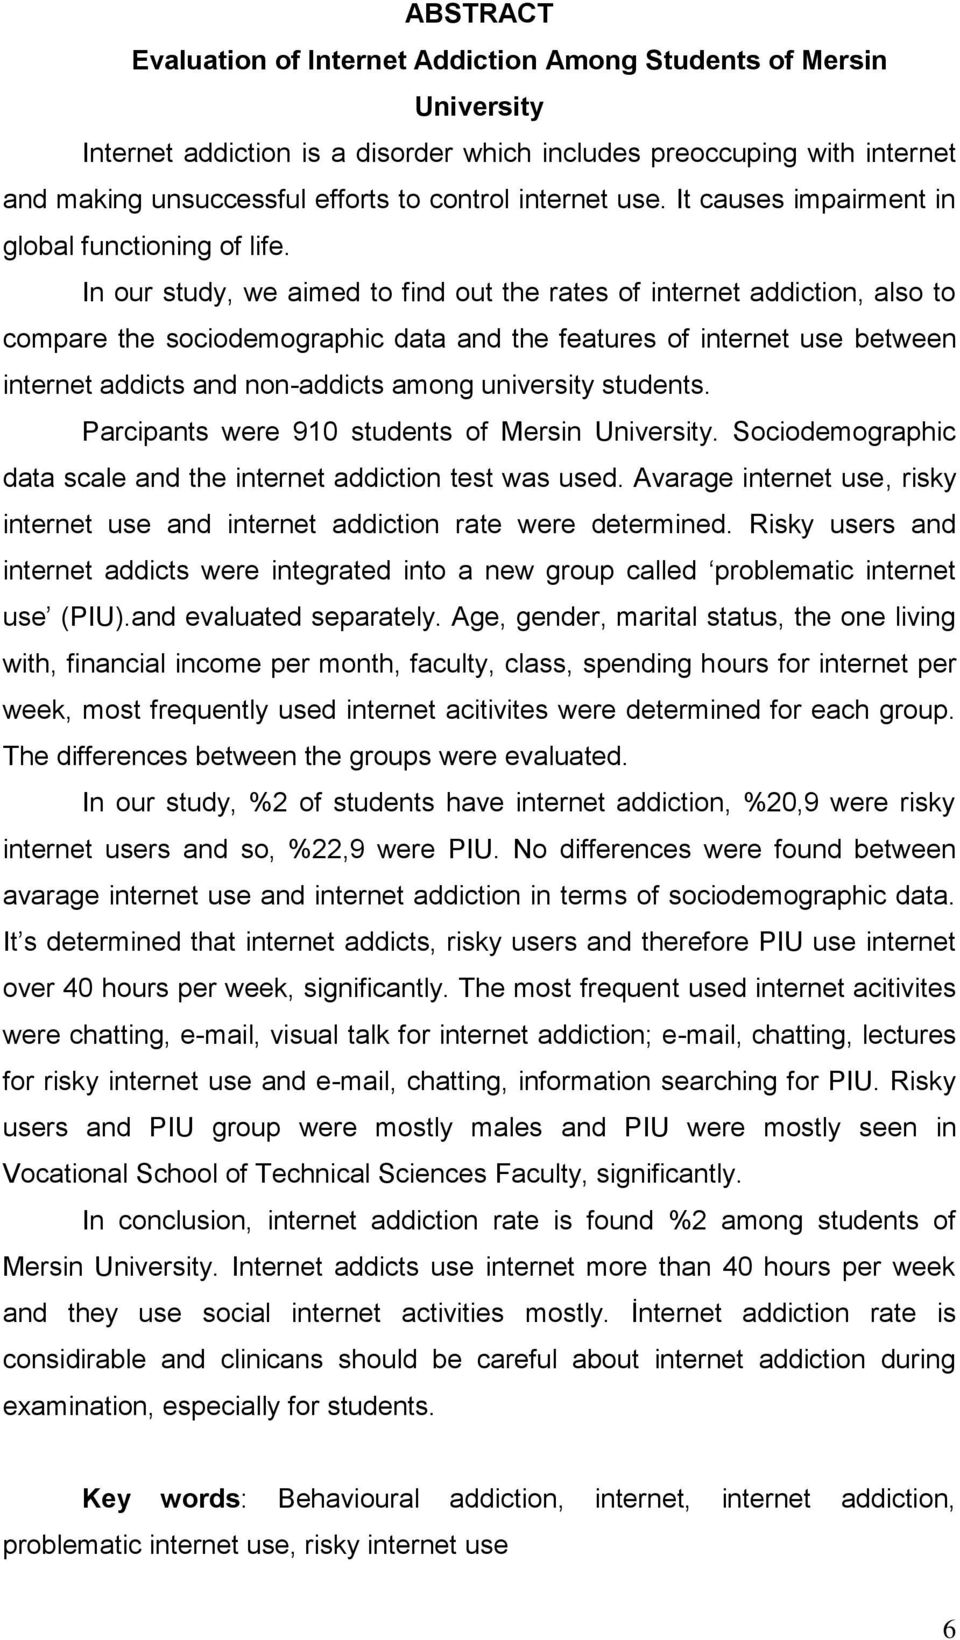 In our study, we aimed to find out the rates of internet addiction, also to compare the sociodemographic data and the features of internet use between internet addicts and non-addicts among